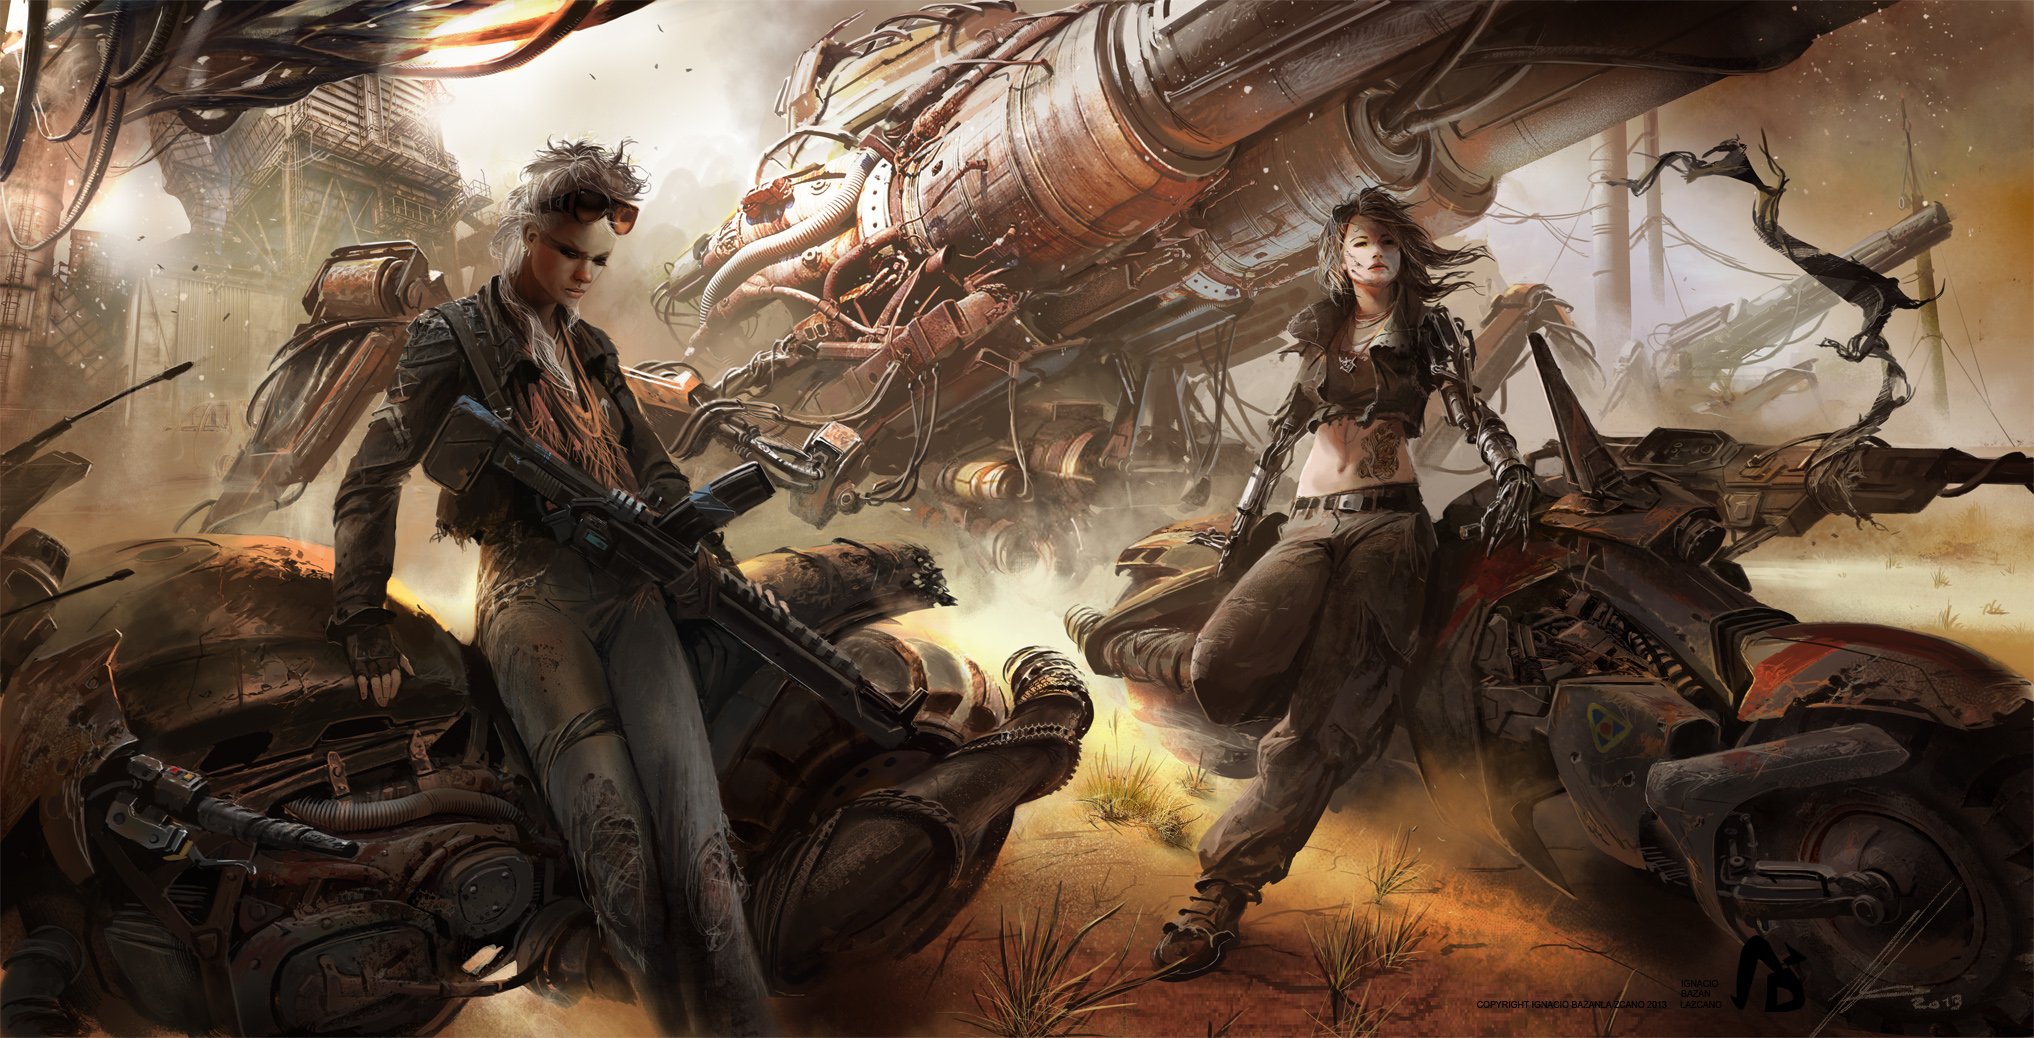 waiting, Girls, Fantasy, Weapons, Motorcycle, Technology, Cool Wallpaper